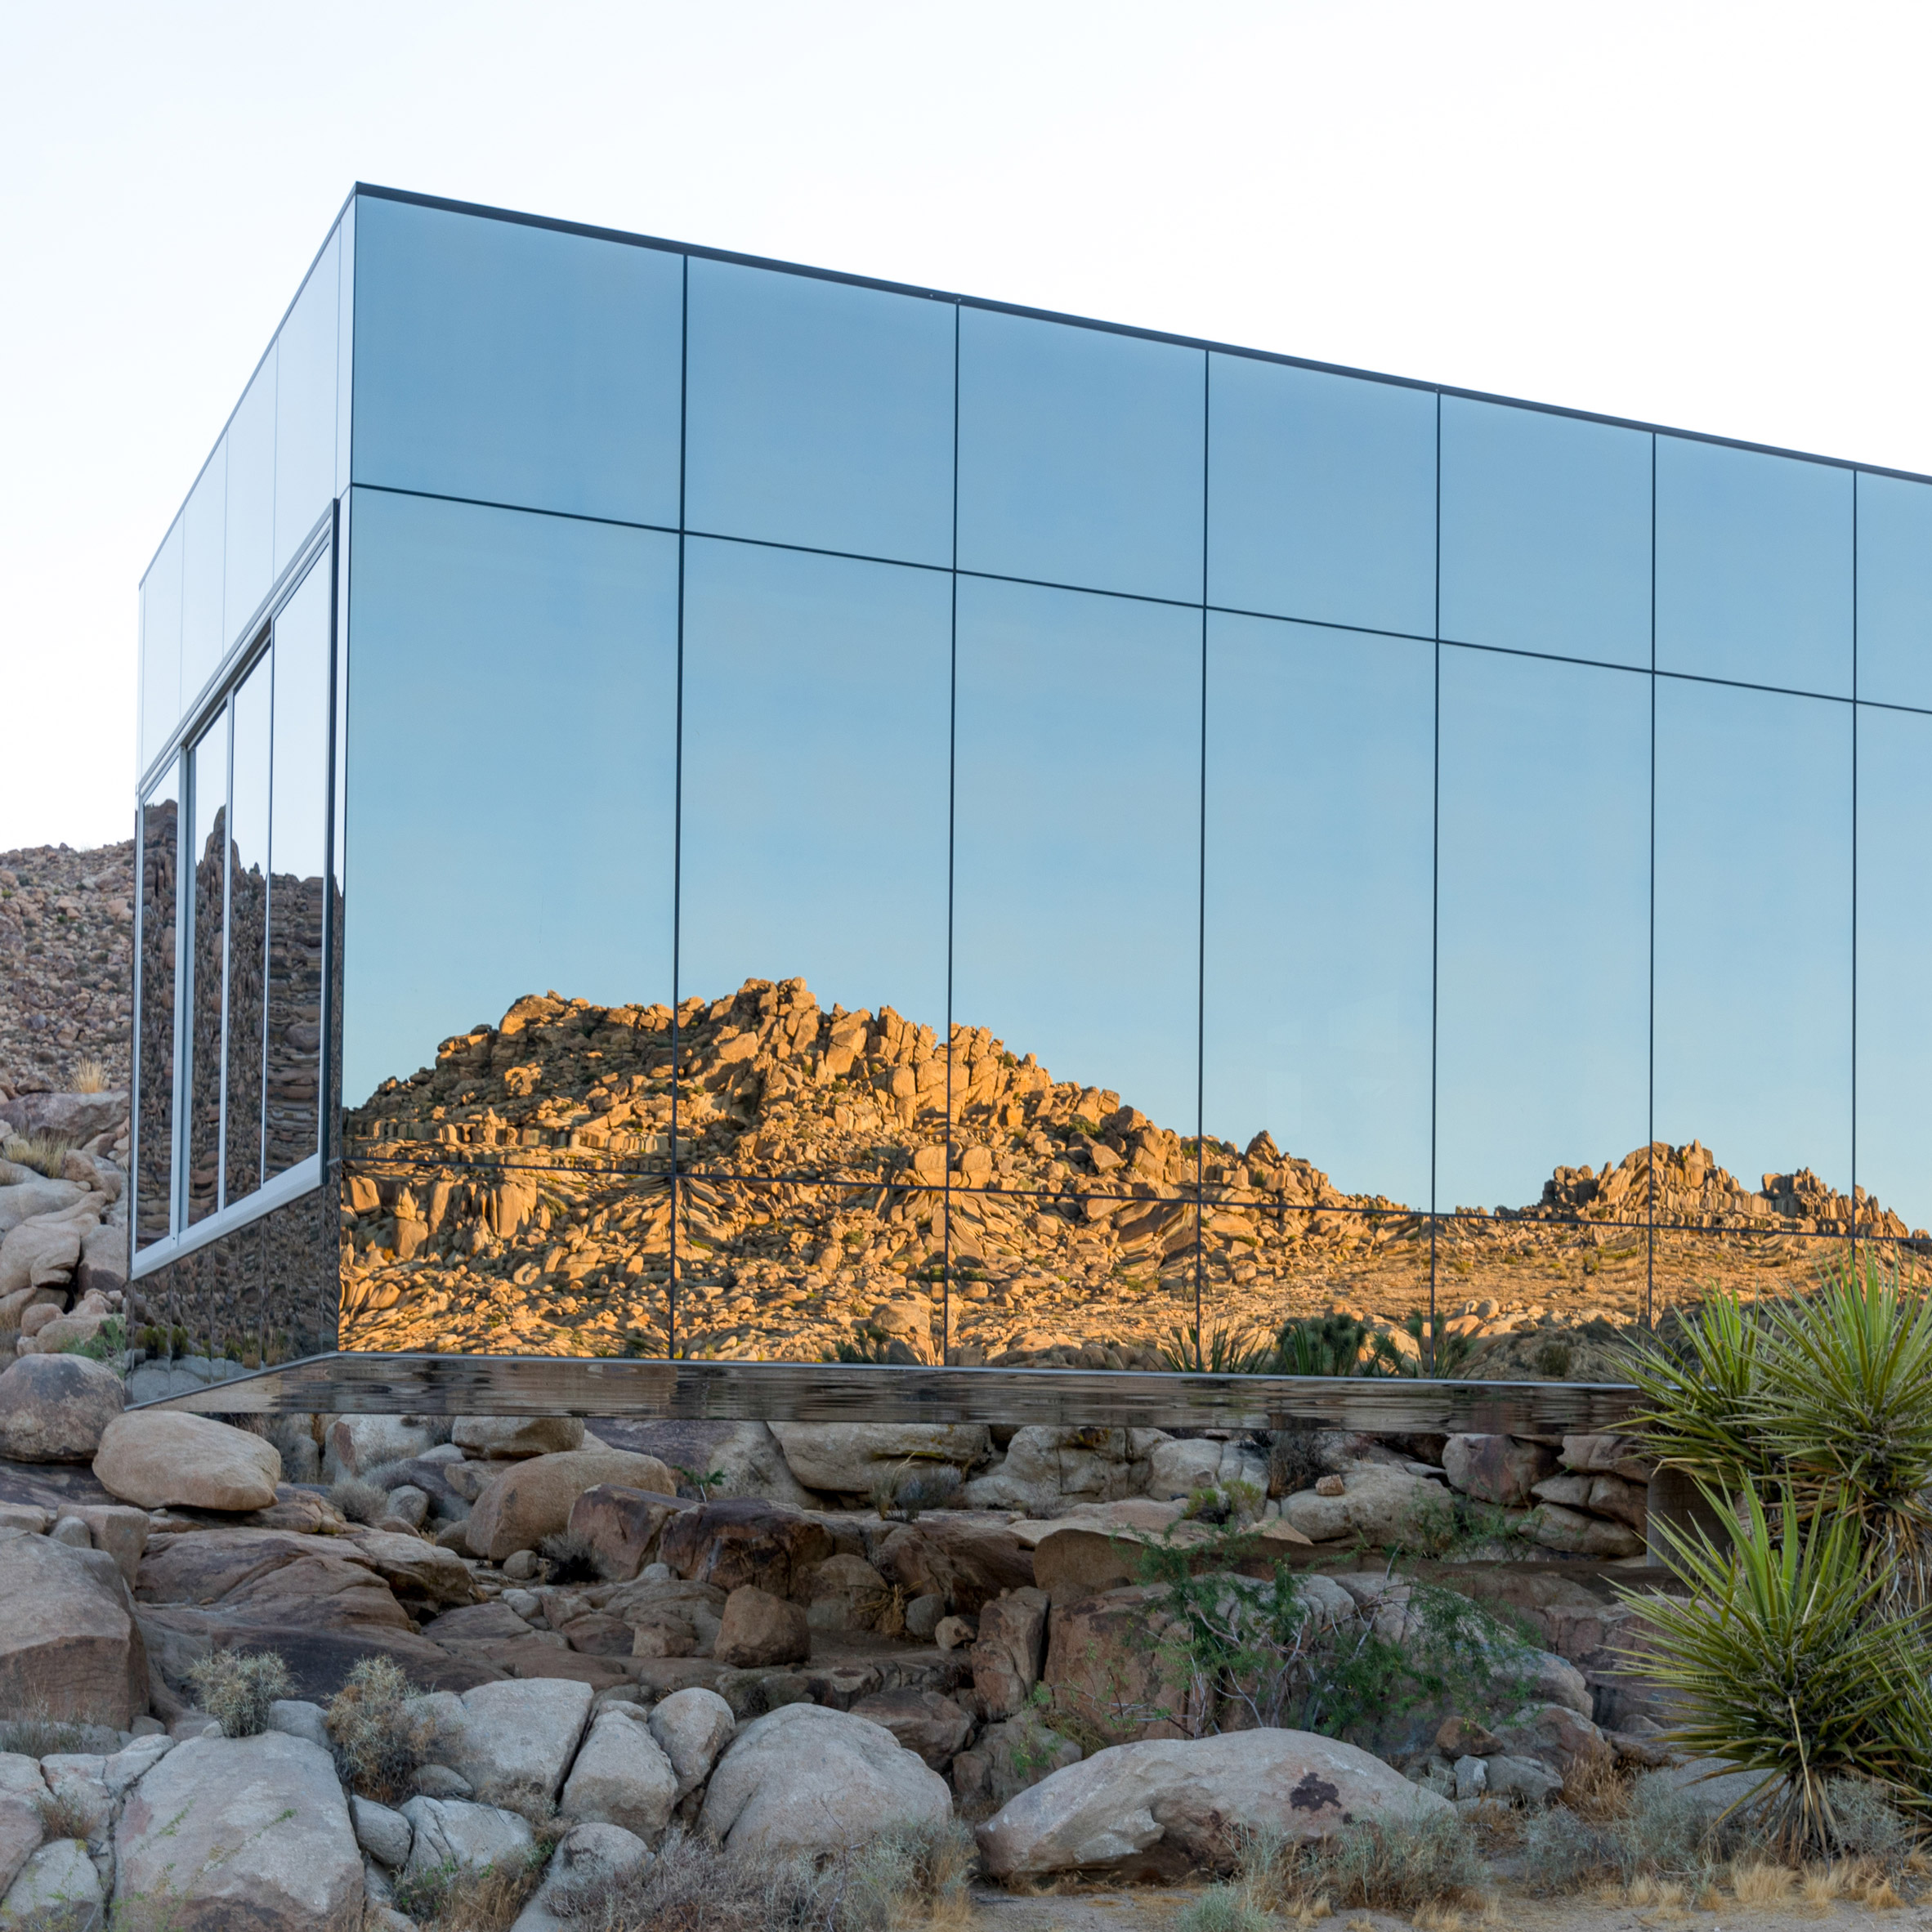 A house with mirrored glass cladding